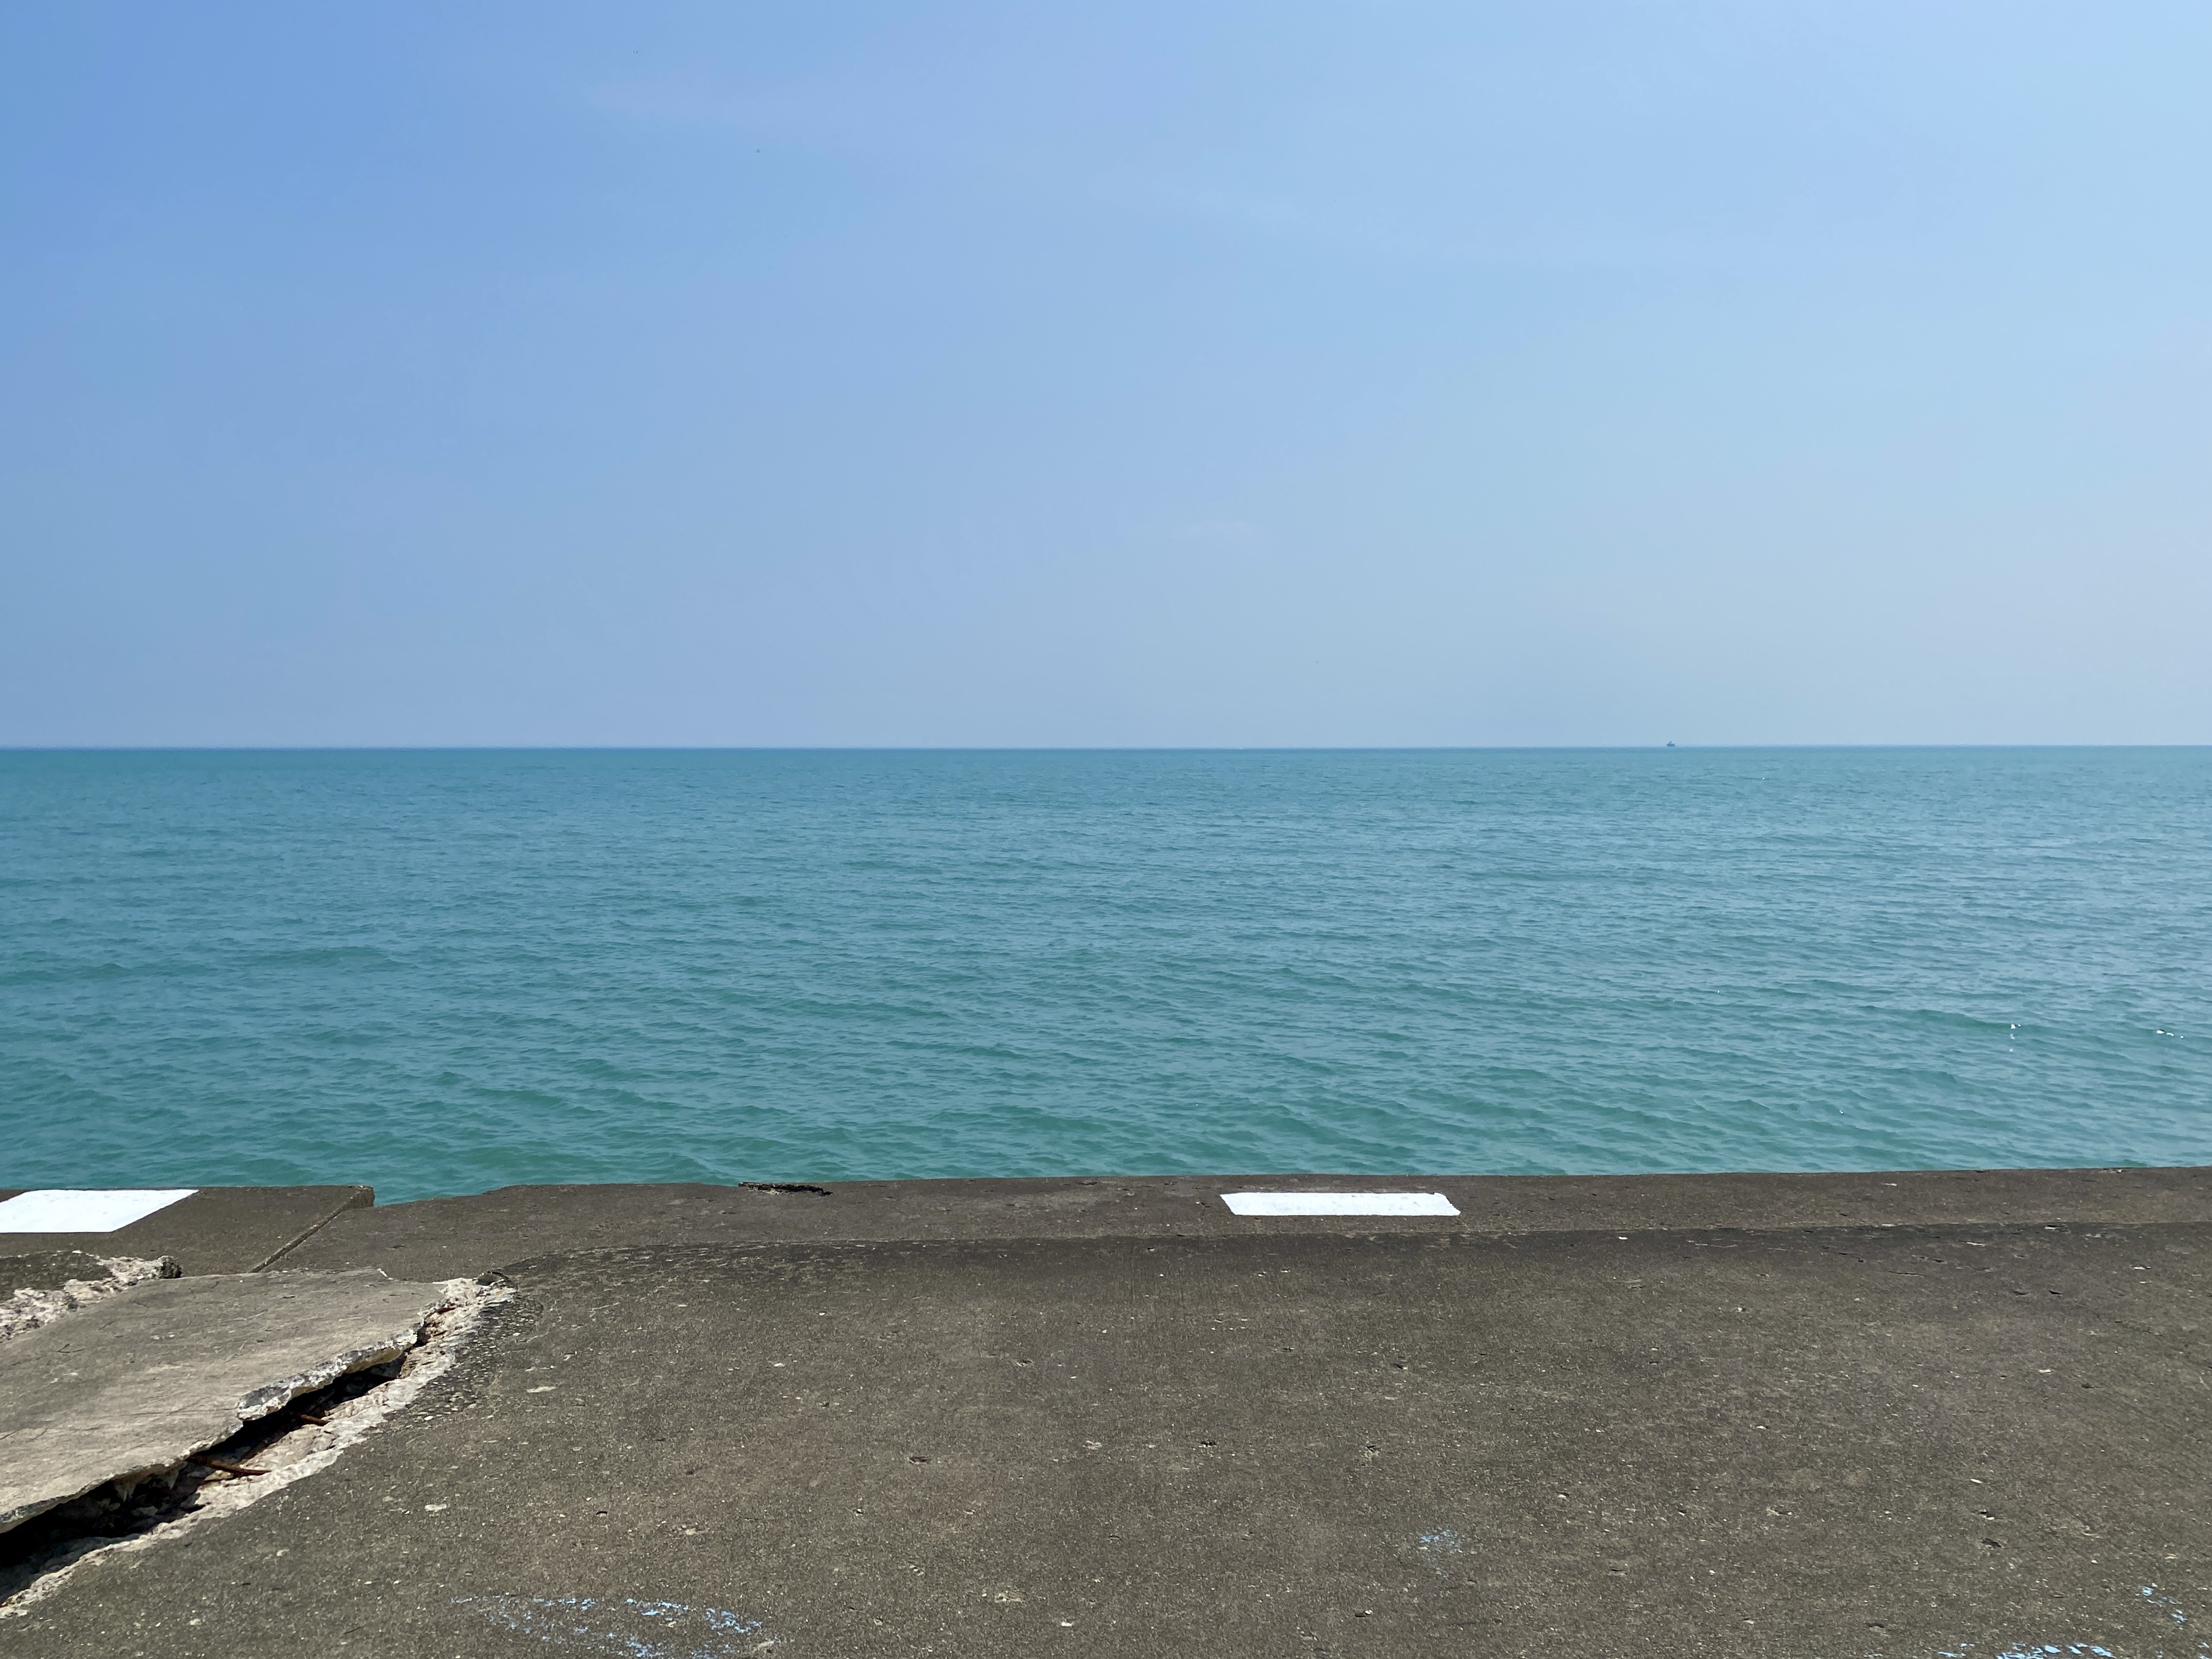 Horizon of Lake Michigan with a hazy blue sky above calm darker blue water and an concrete shelf in the foreground